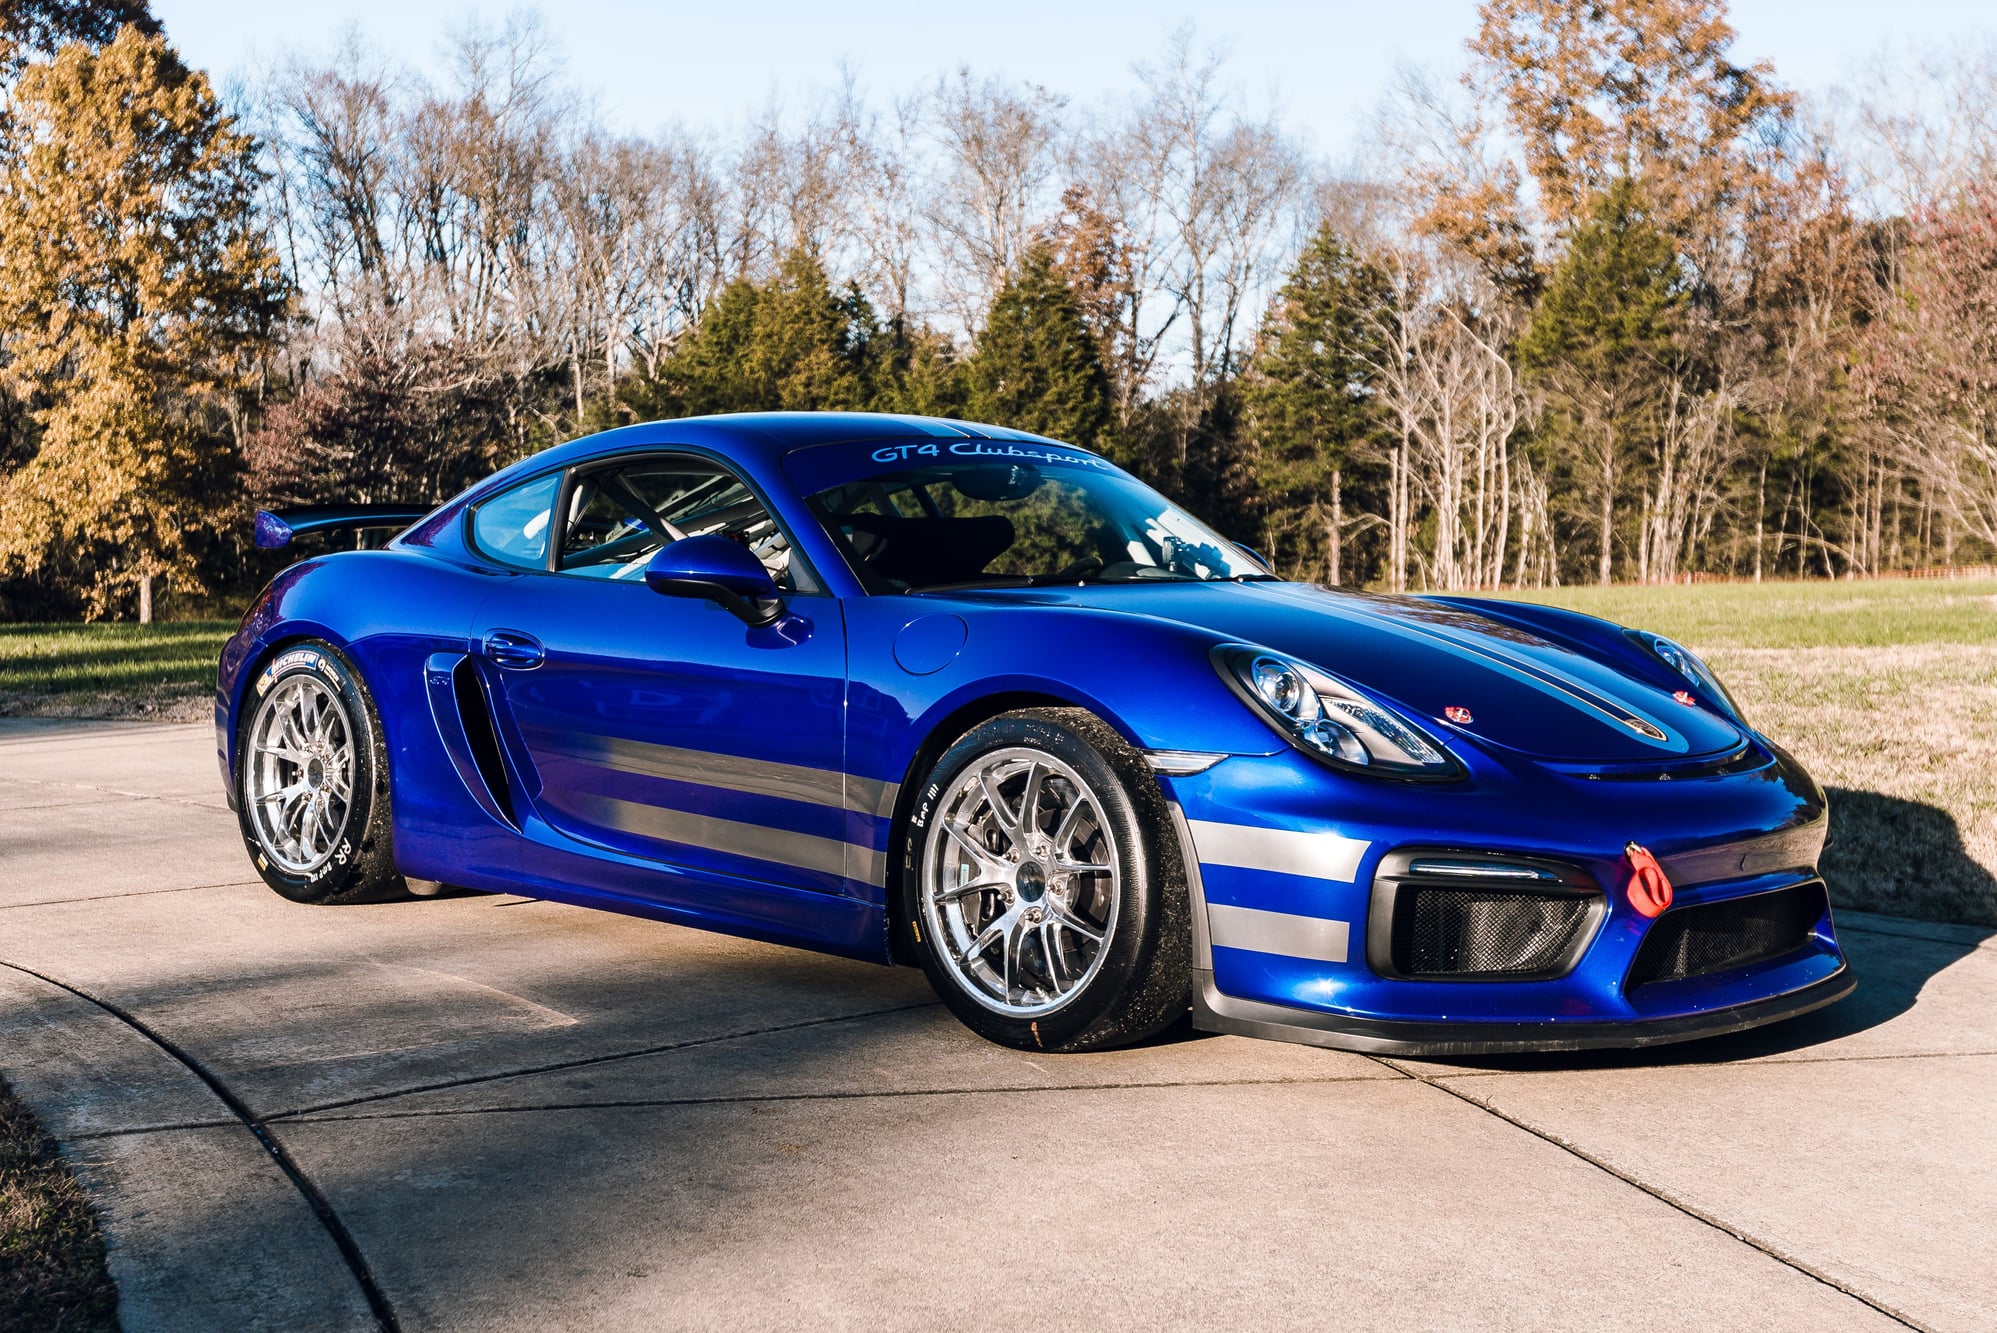 2016 Porsche Cayman GT4 - 2016 Cayman GT4 Clubsport - Used - VIN WP0AB2A88CS793247 - 1,146 Miles - 6 cyl - 2WD - Automatic - Coupe - Blue - Franklin, TN 37064, United States